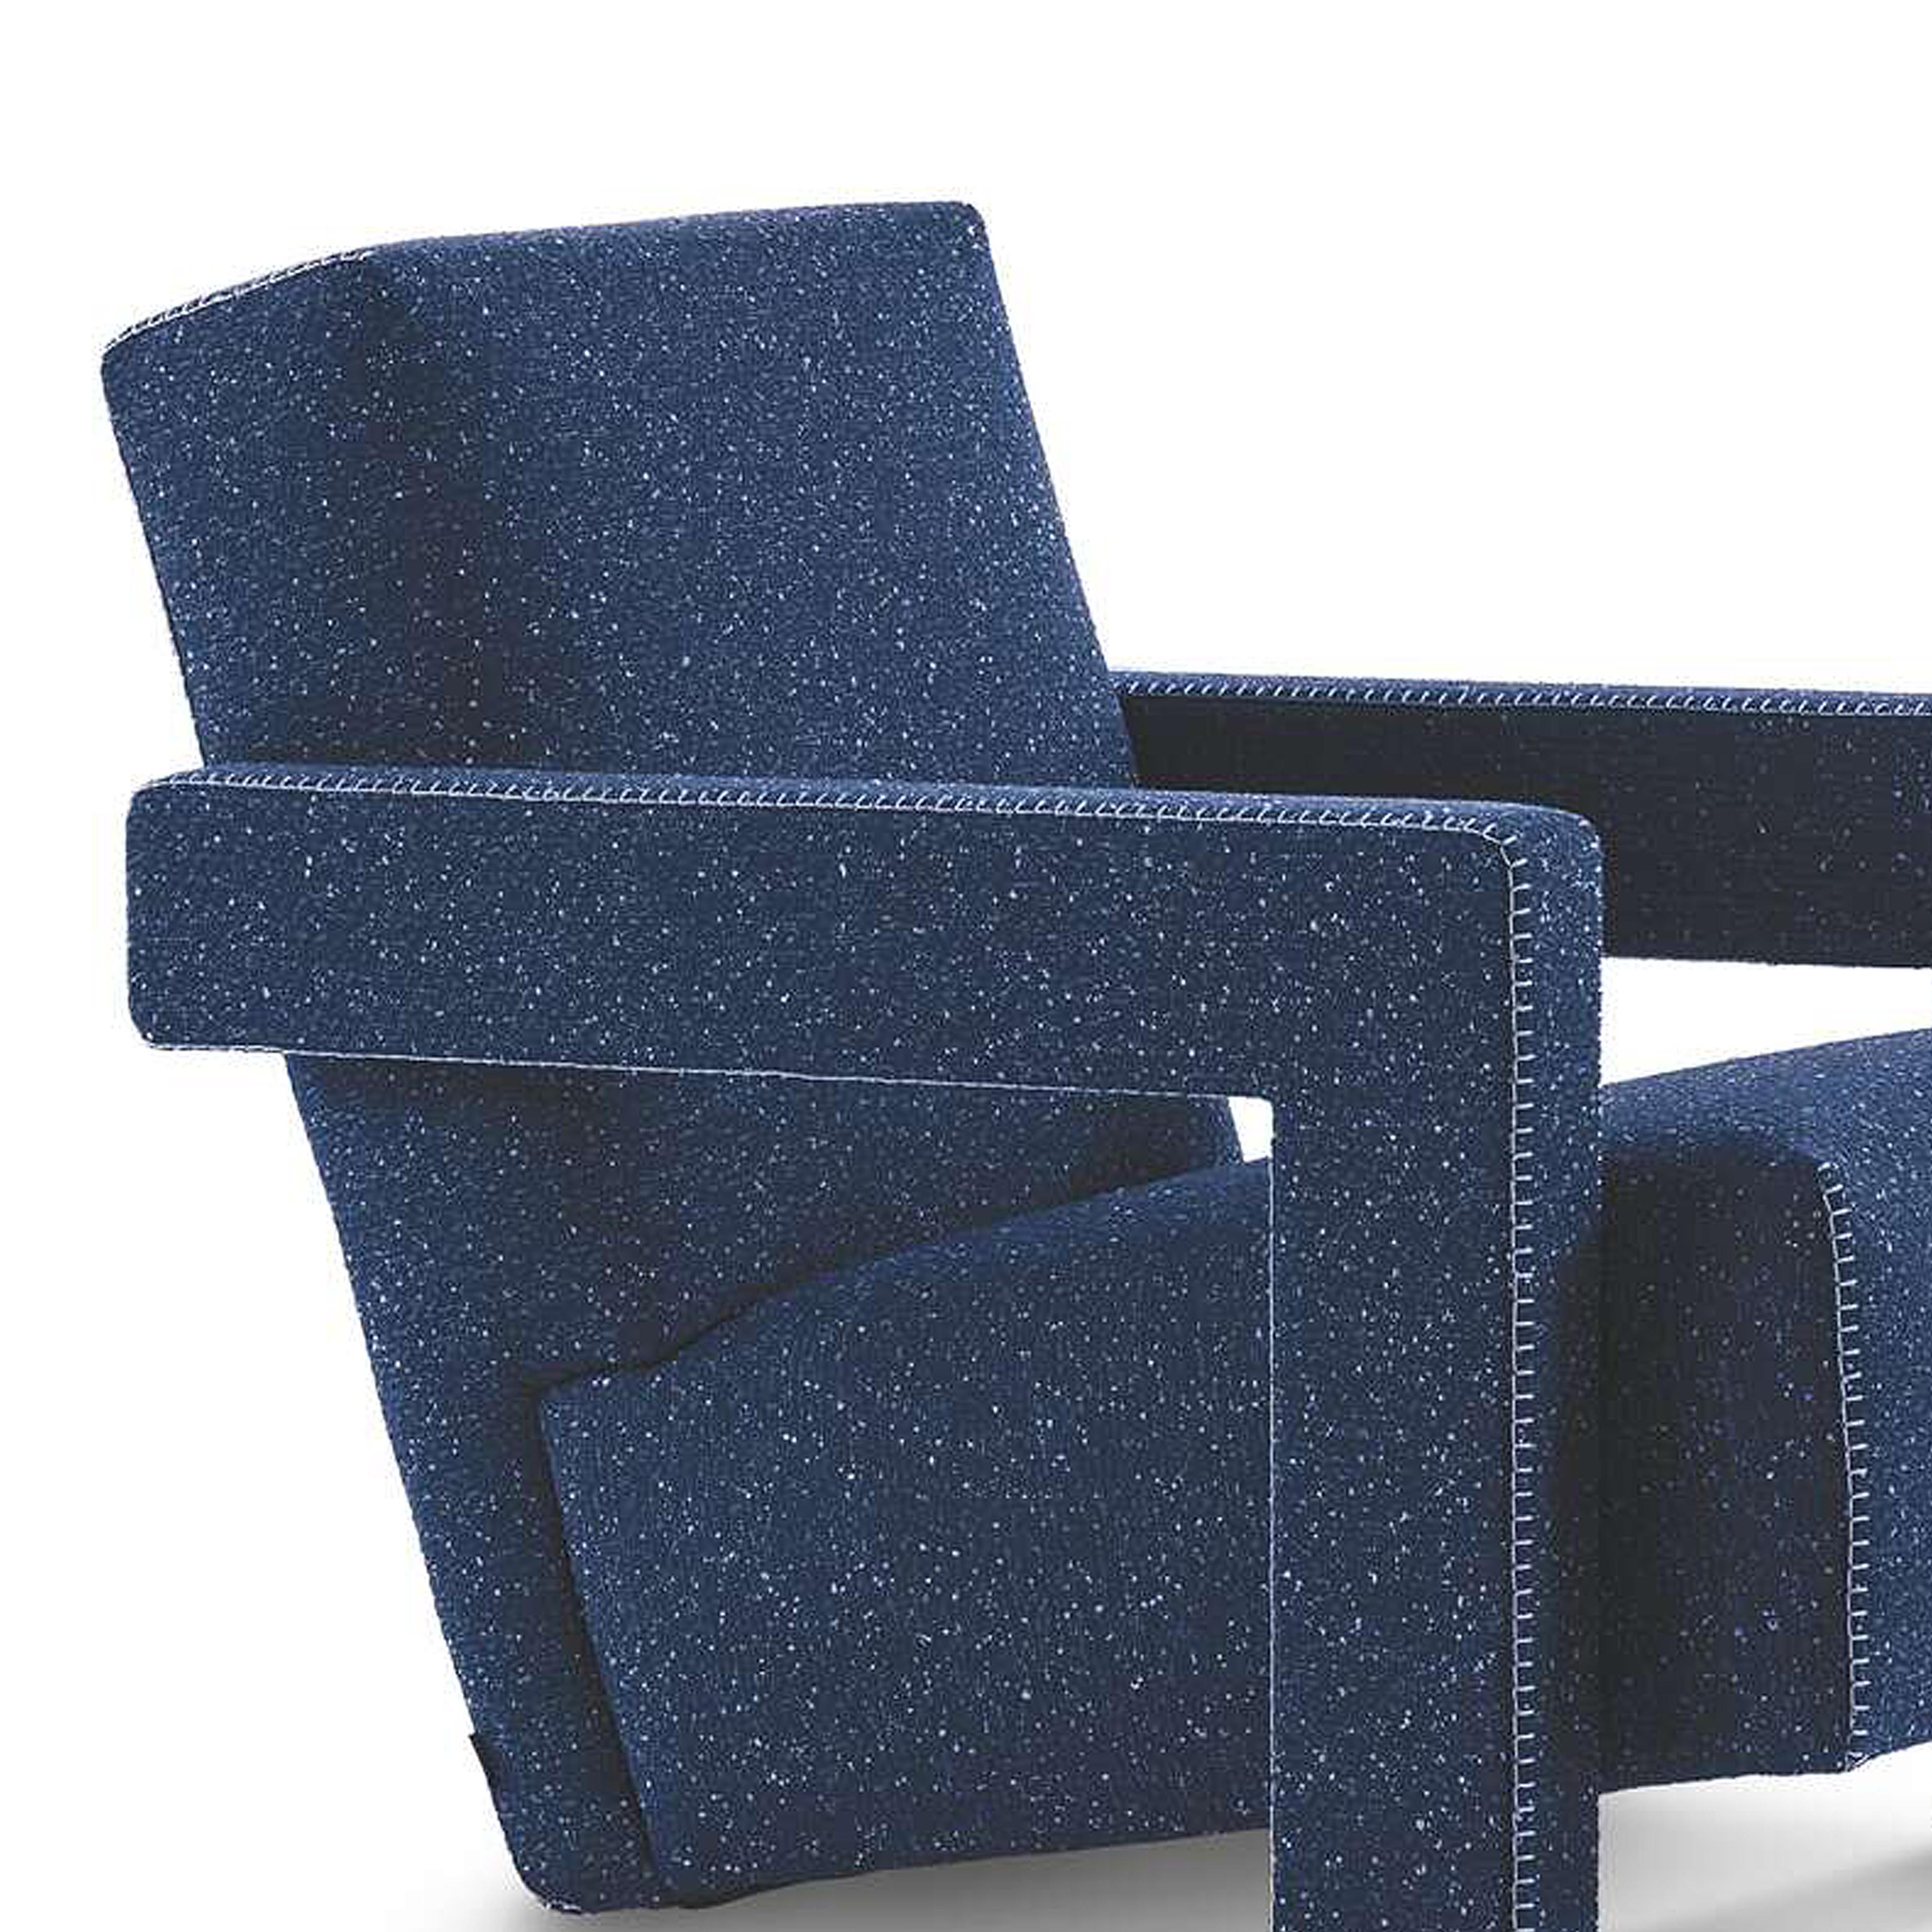 Armchair designed by Gerrit Thomas Rietveld in 1935. Relaunched in 2015.
Manufactured by Cassina in Italy.

Gerrit T. Rietveld came up with the design for the Utrecht armchair in 1935 while working for the Metz & Co. department store in